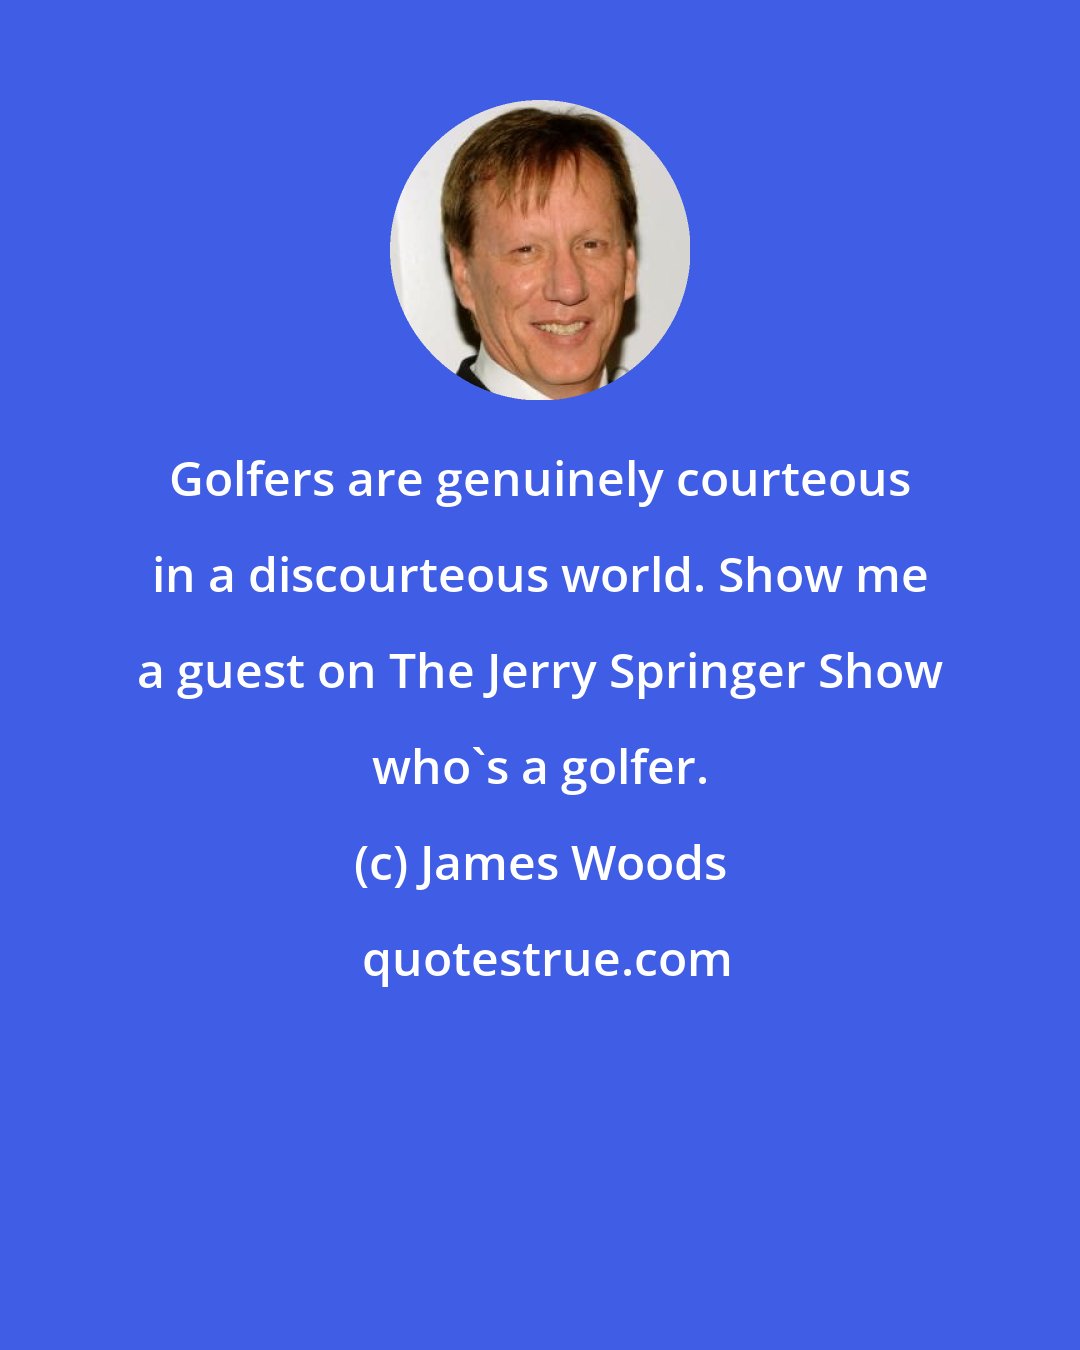 James Woods: Golfers are genuinely courteous in a discourteous world. Show me a guest on The Jerry Springer Show who's a golfer.